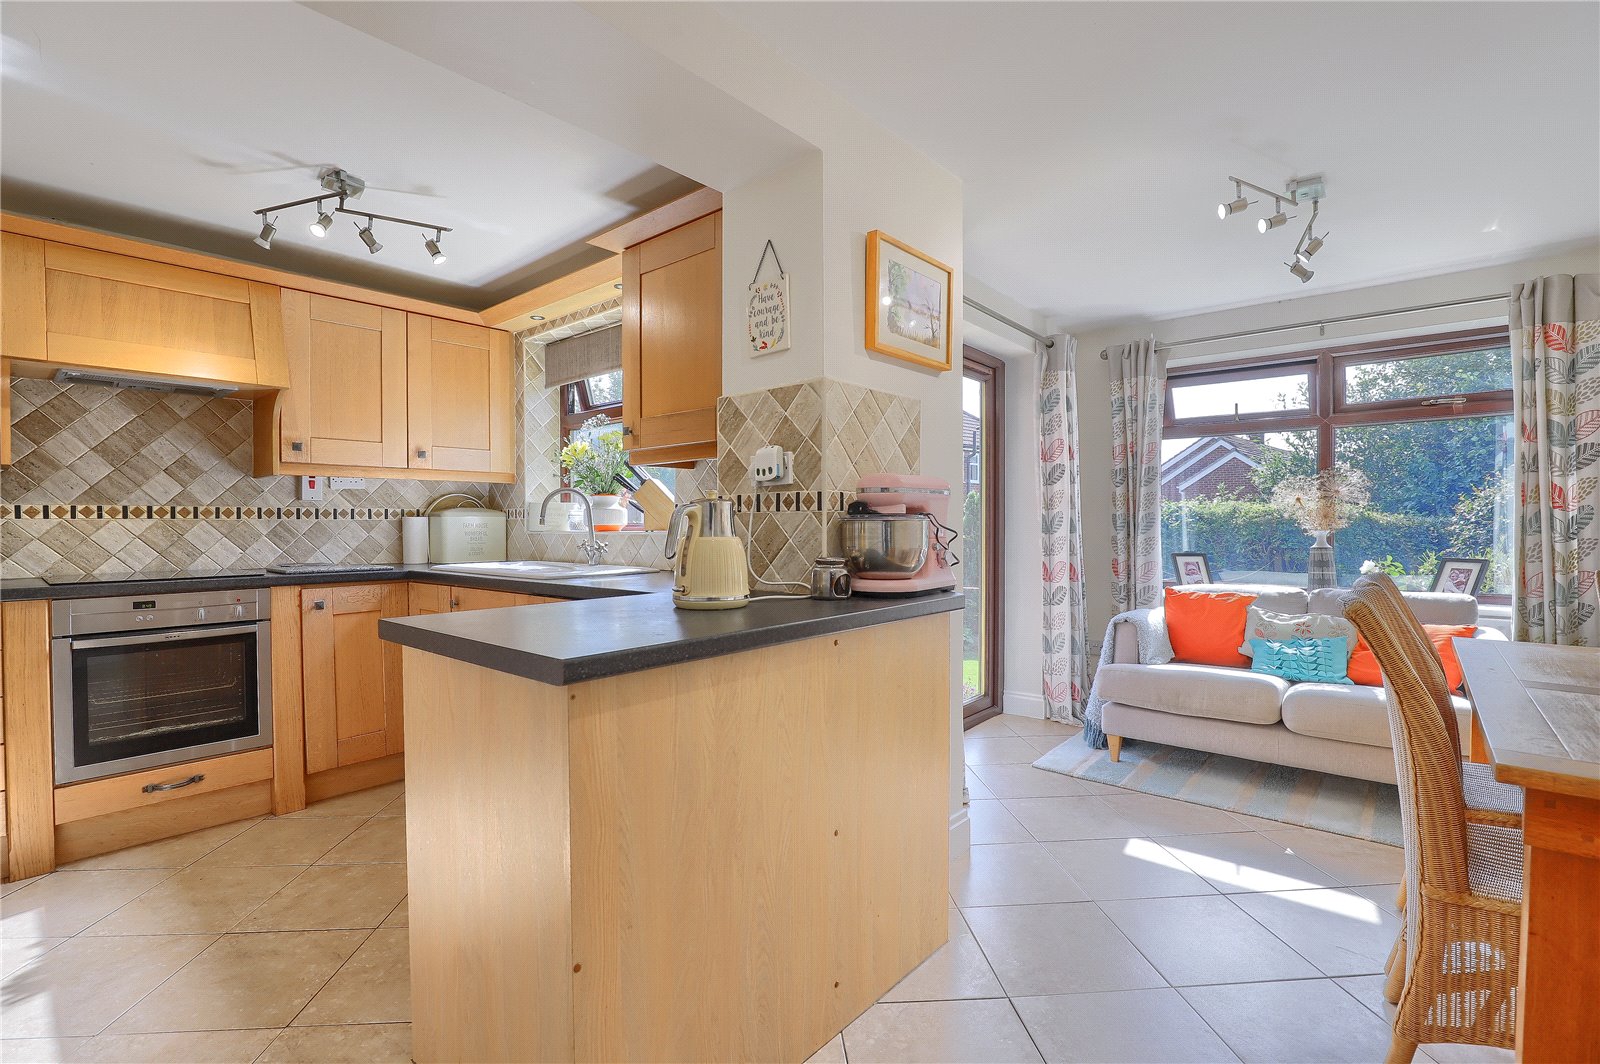 4 bed house for sale in Beverley Road, Nunthorpe 2